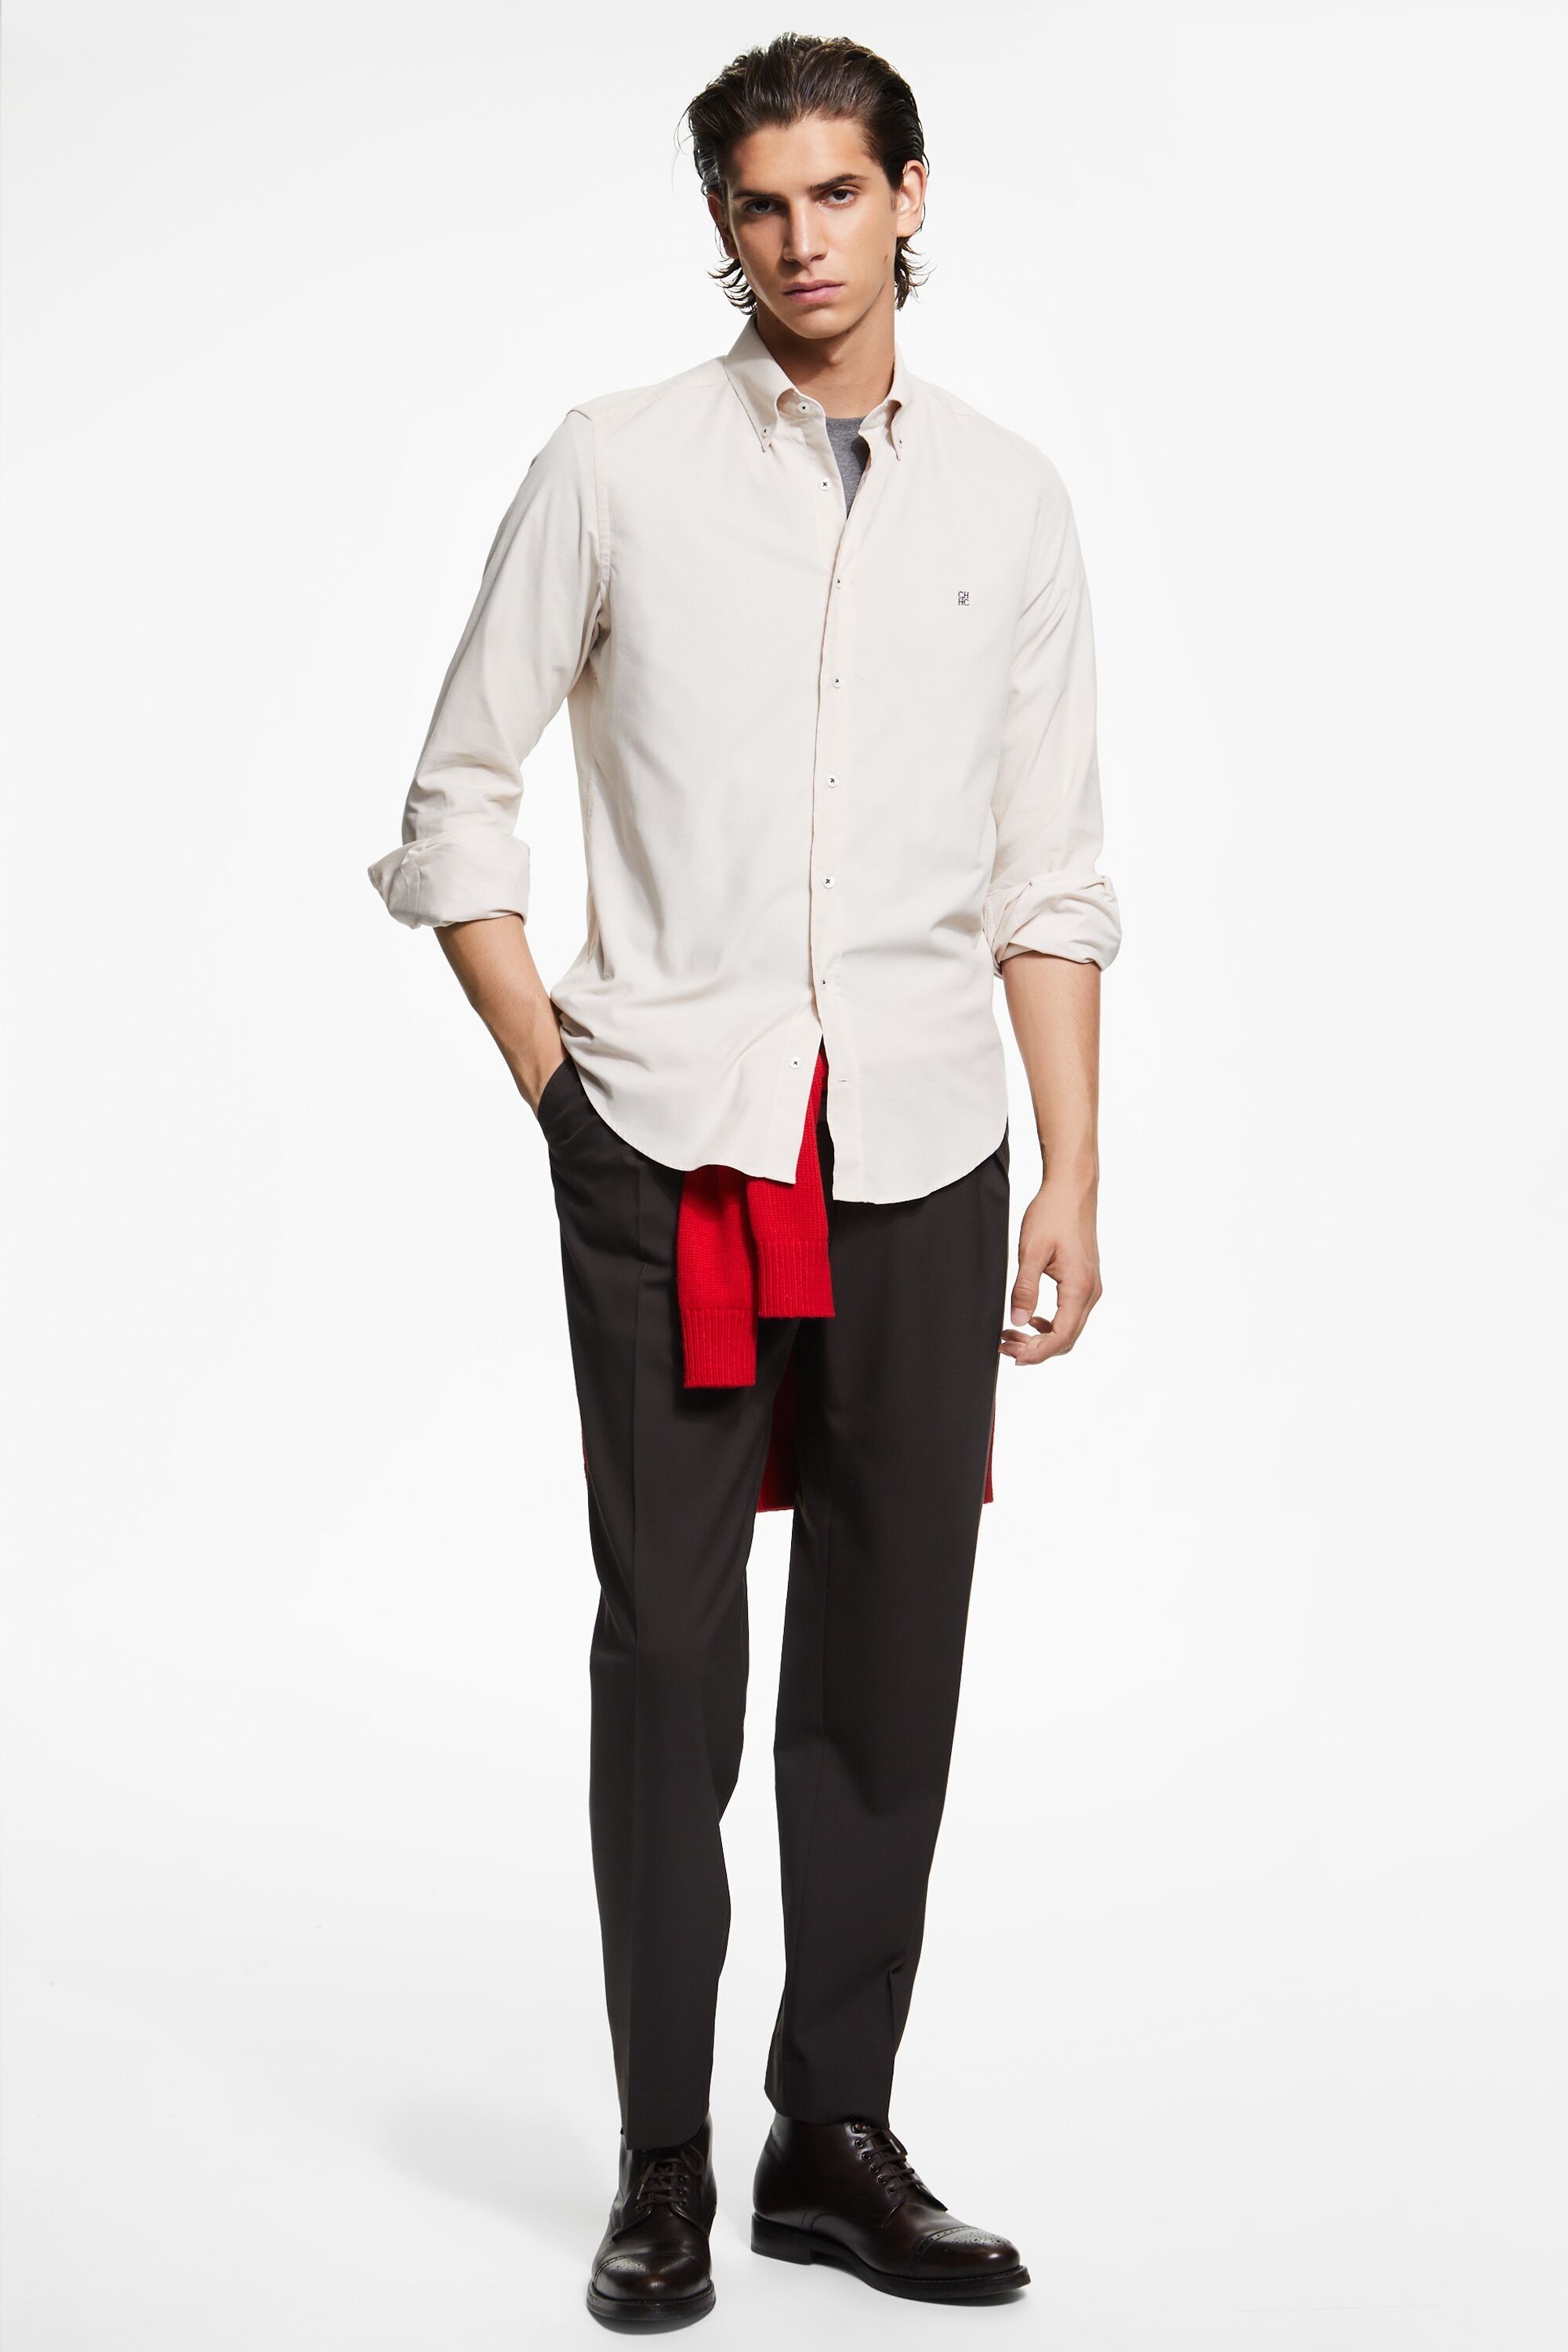 Twill relaxed fit pants